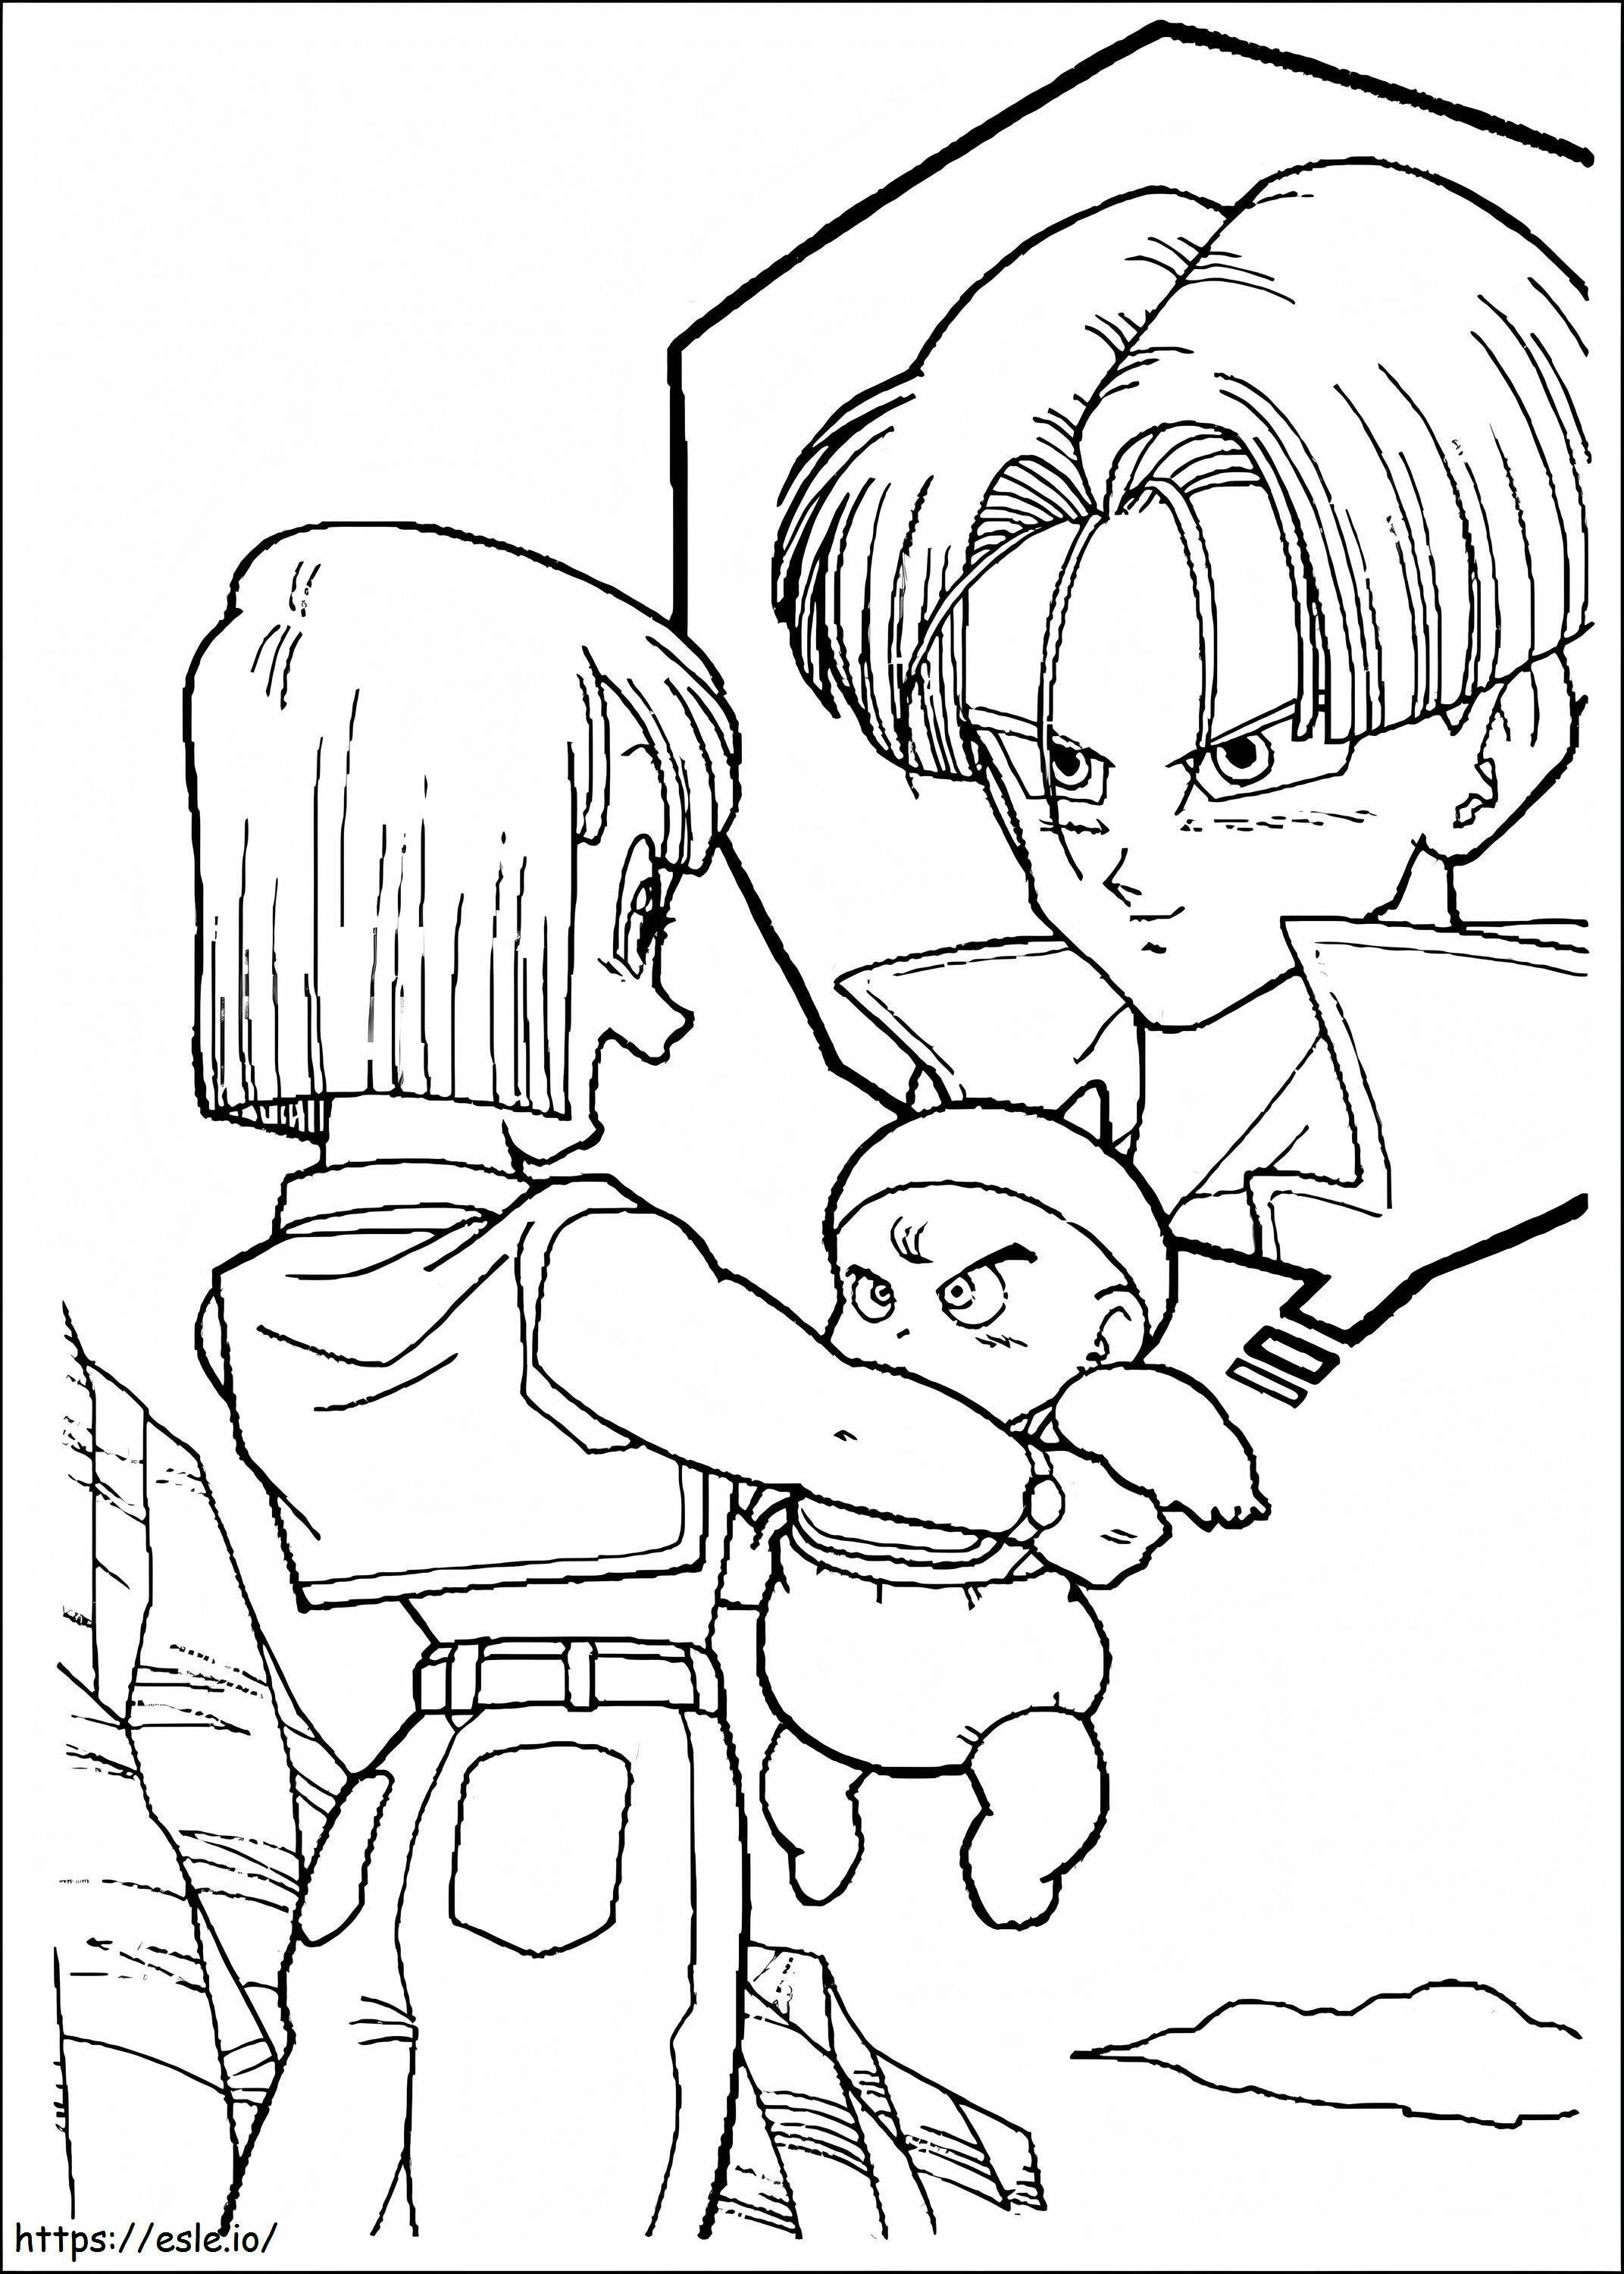 Bulma Holding Trunks coloring page